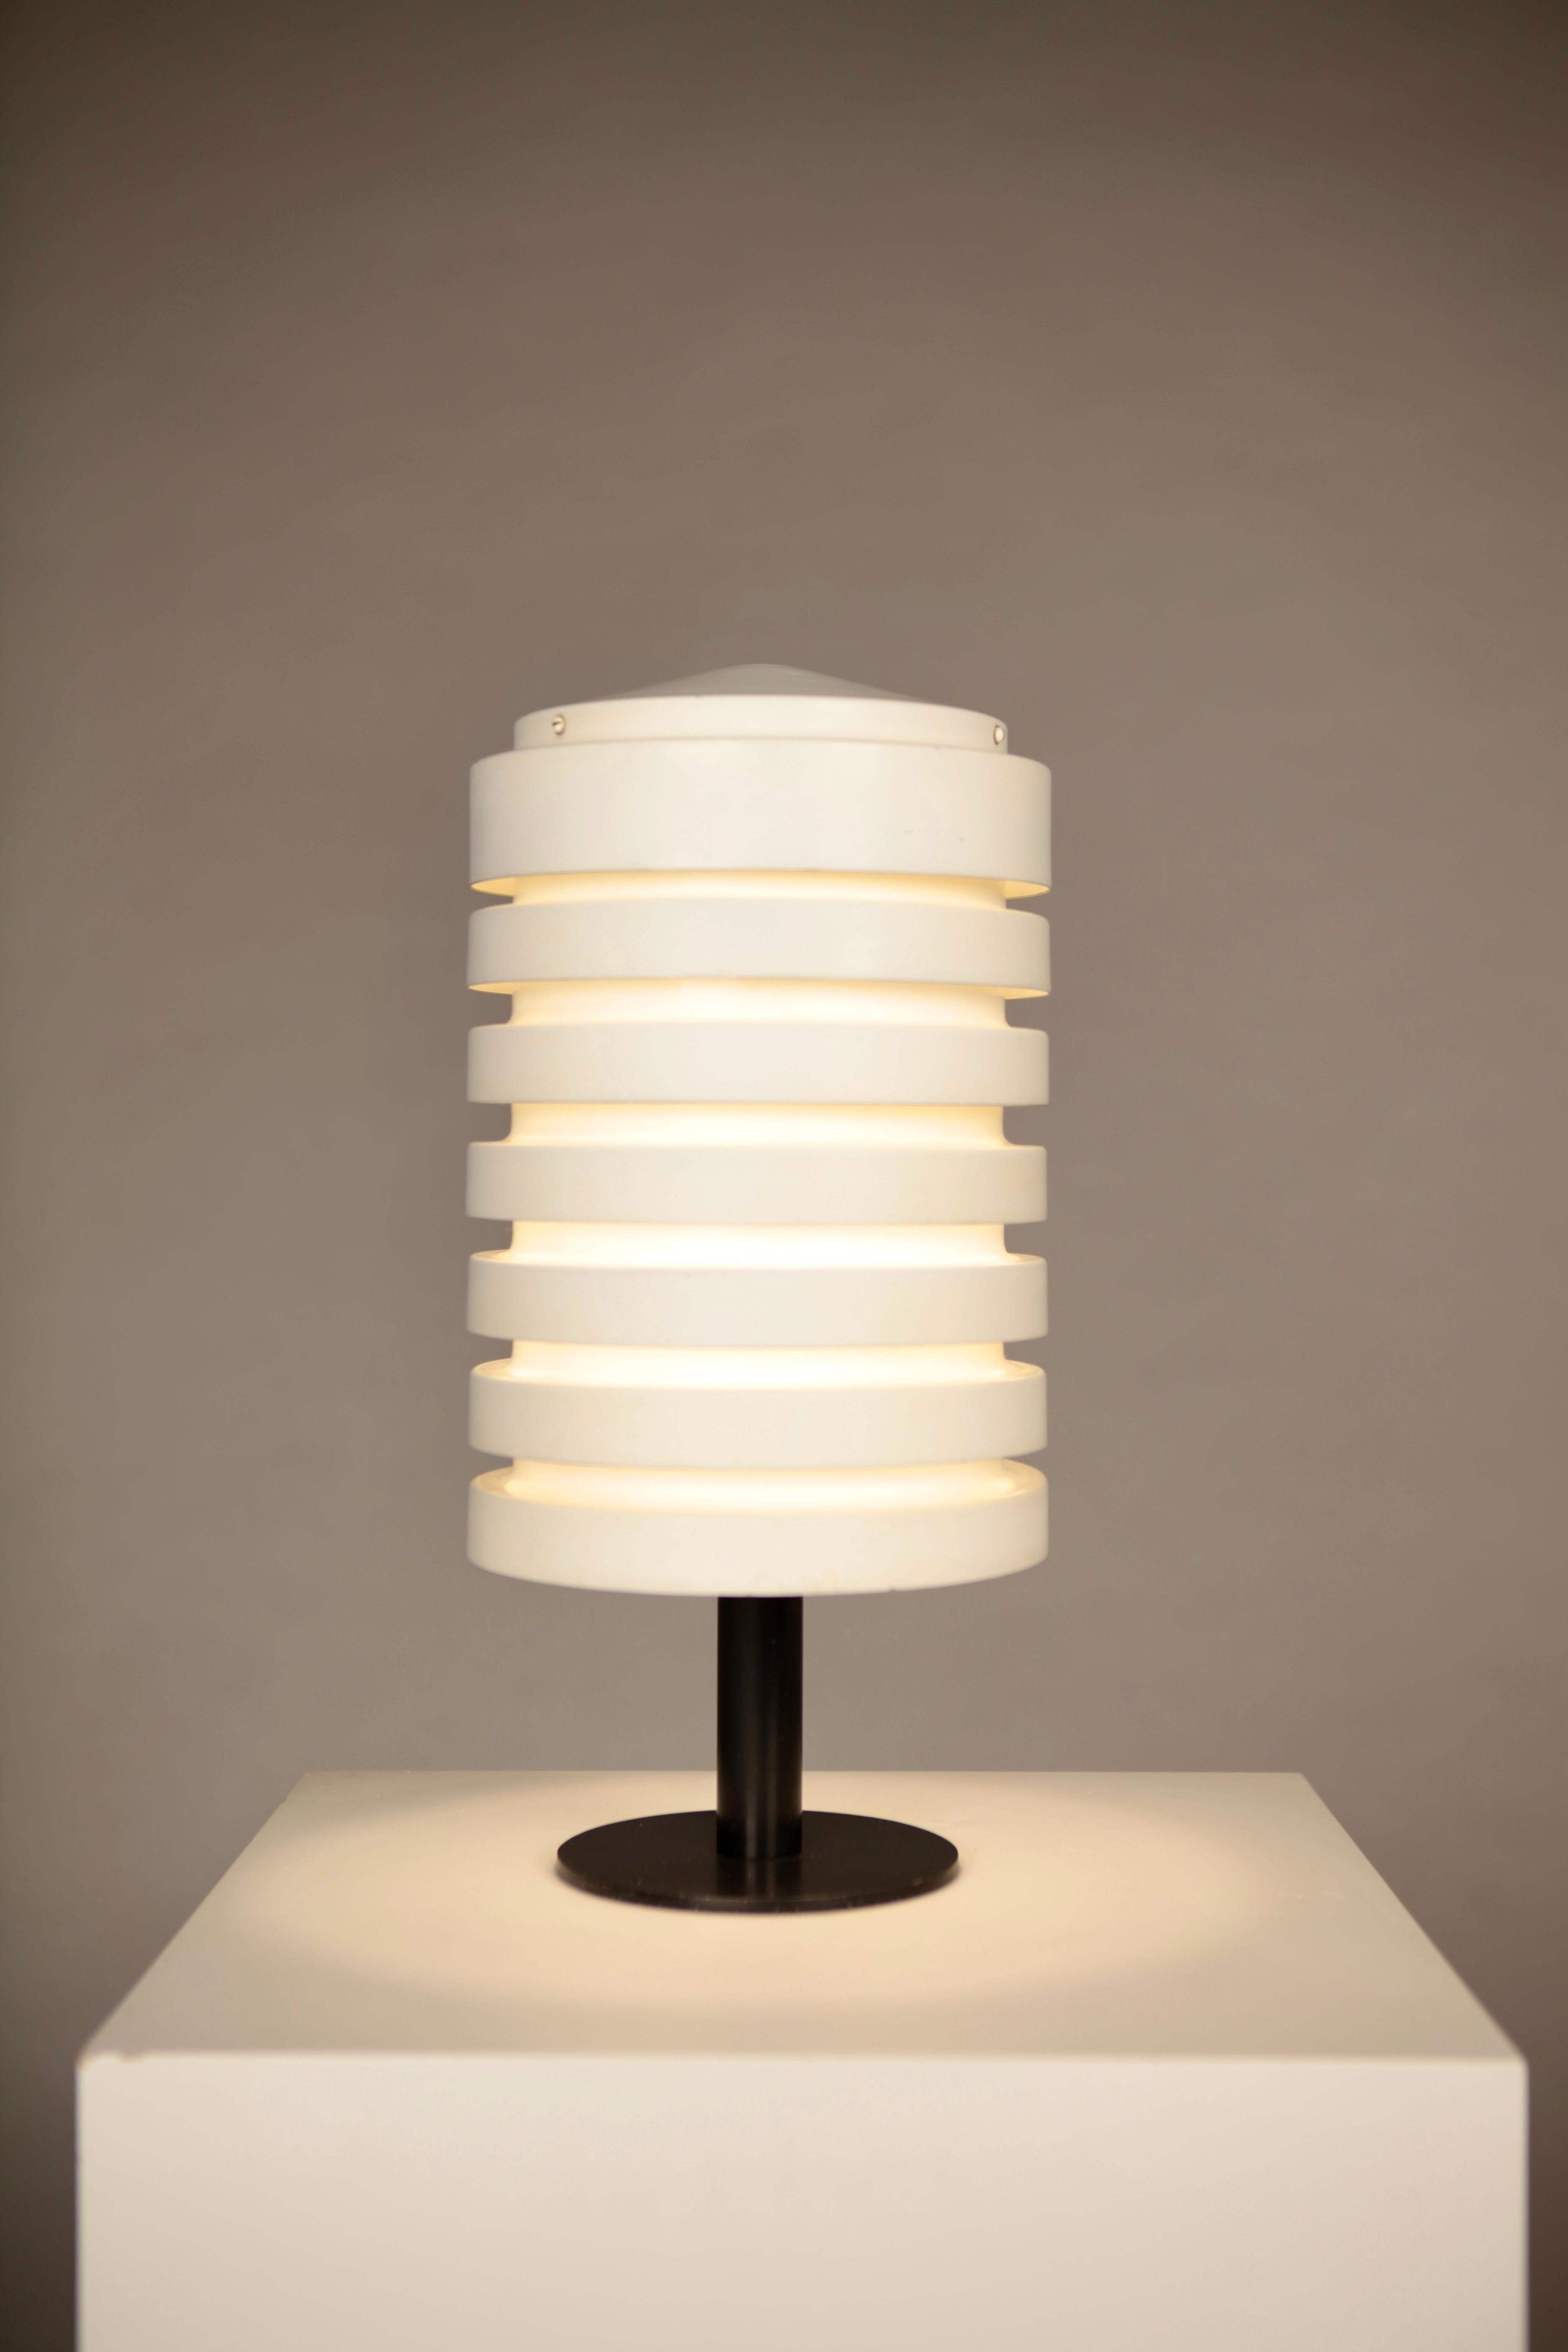 Hans-Agne Jakobsson,
Table lamp, Model B 142 in white lacquered metal, 1960s
Good vintage condition,
The lamp is sold together with the matching pendant.